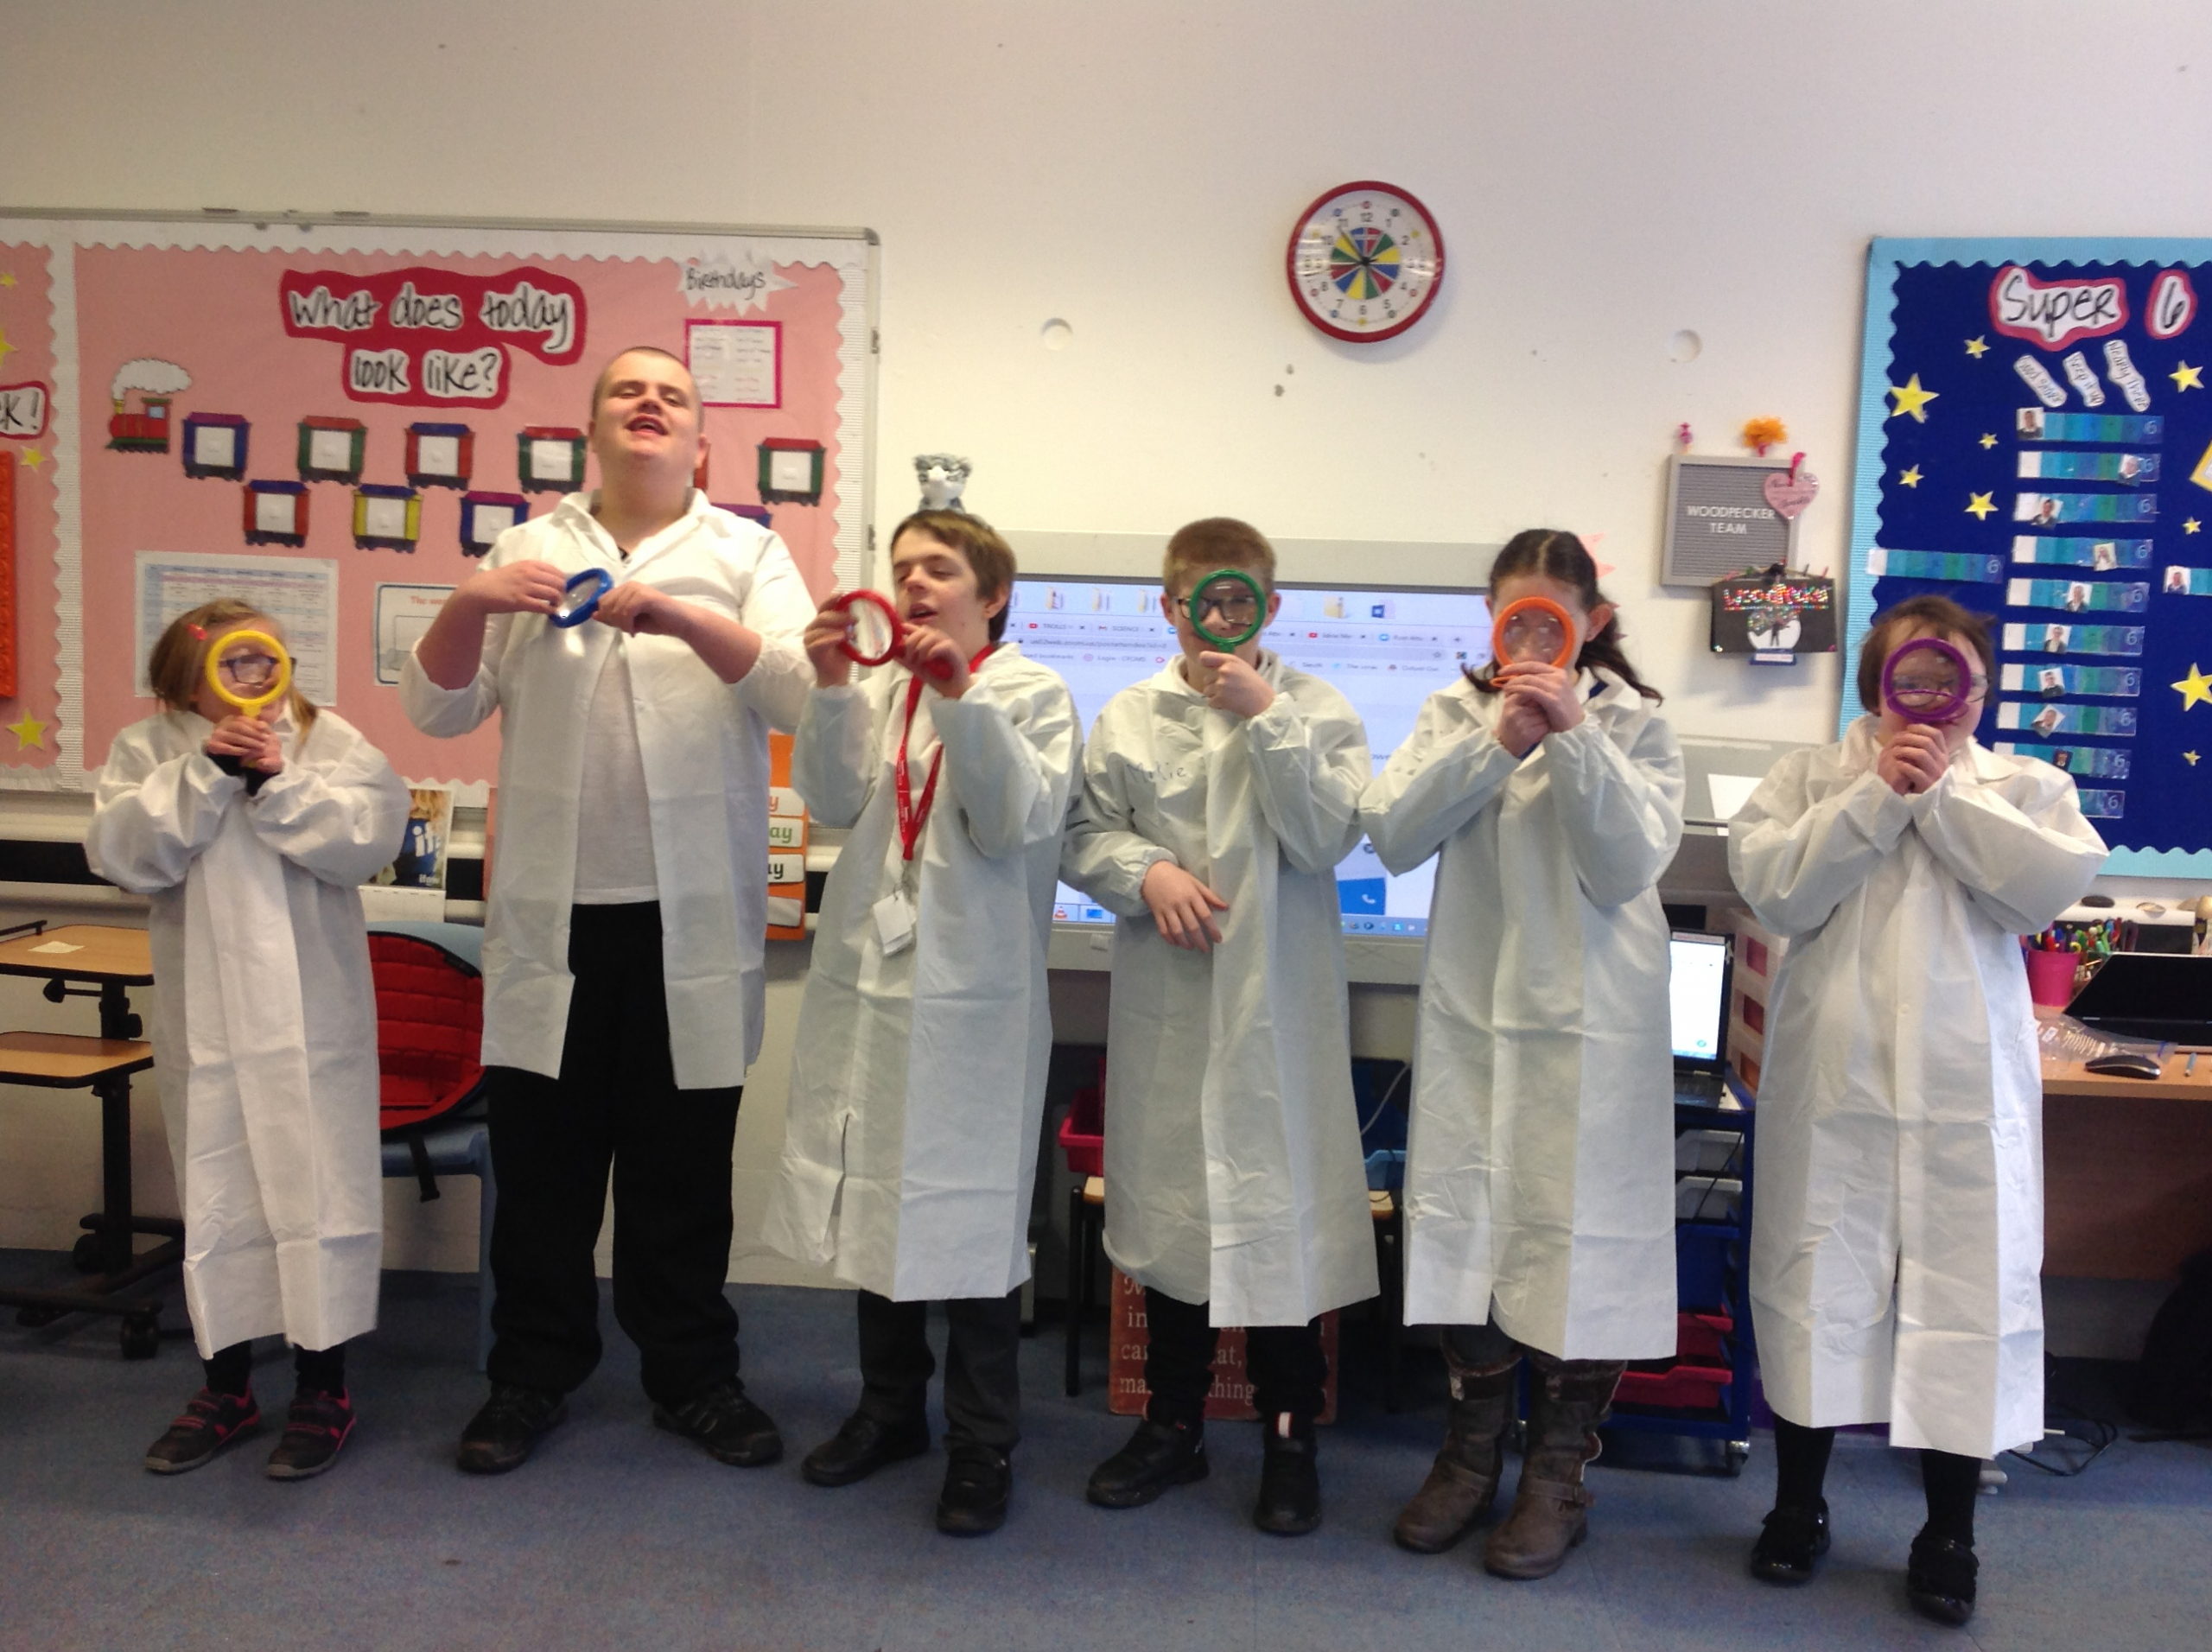 Six young people with learning disabilities stand in a line. They are in a classroom and are all wearing white lab coats. They have large magnifying glasses which they are holding up to their eyes. They are laughing